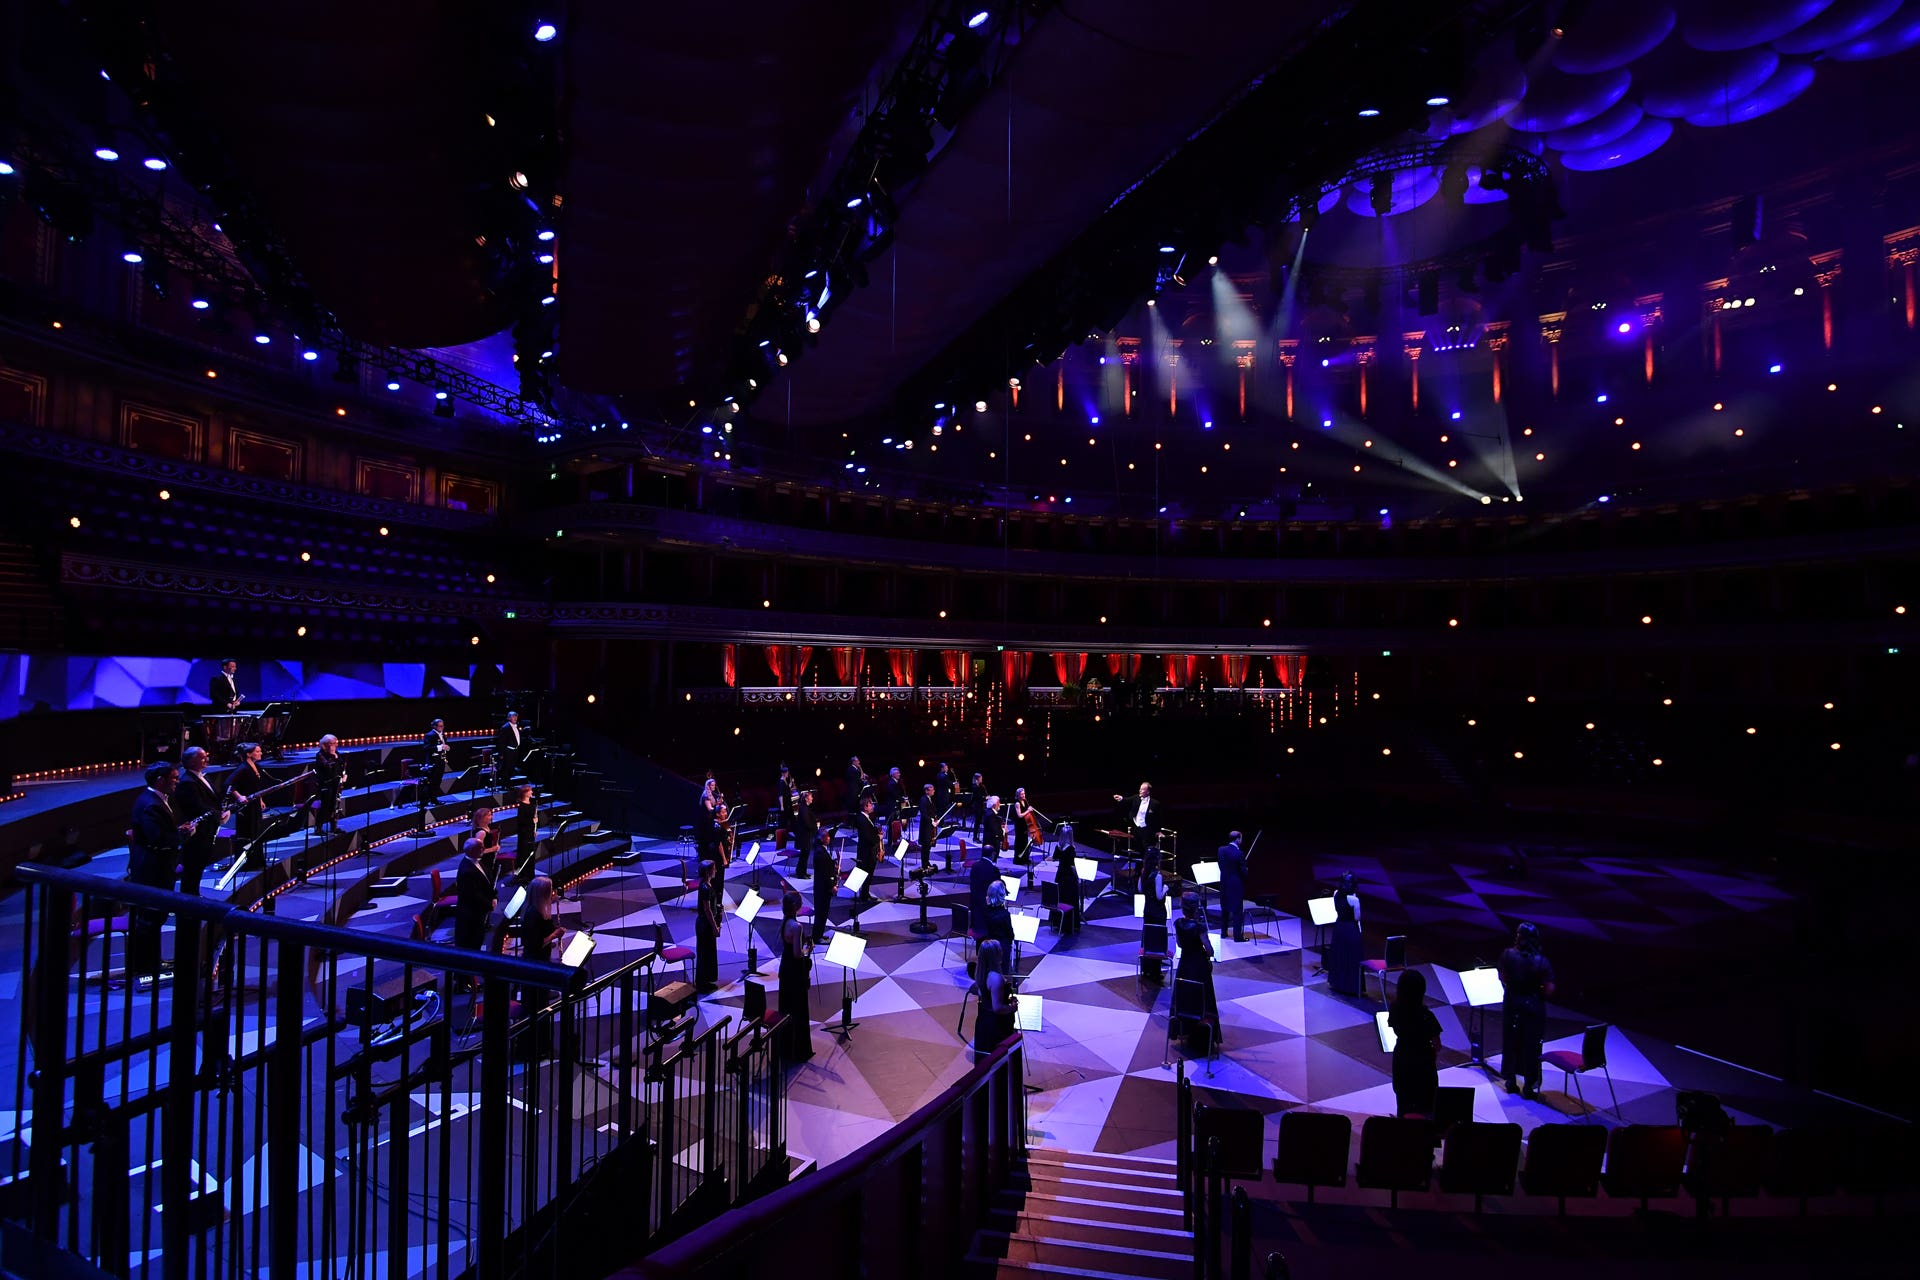 The BBC Symphony Orchestra during the First Night of the Proms 2020 at the Royal Albert Hall in London (BBC/PA)